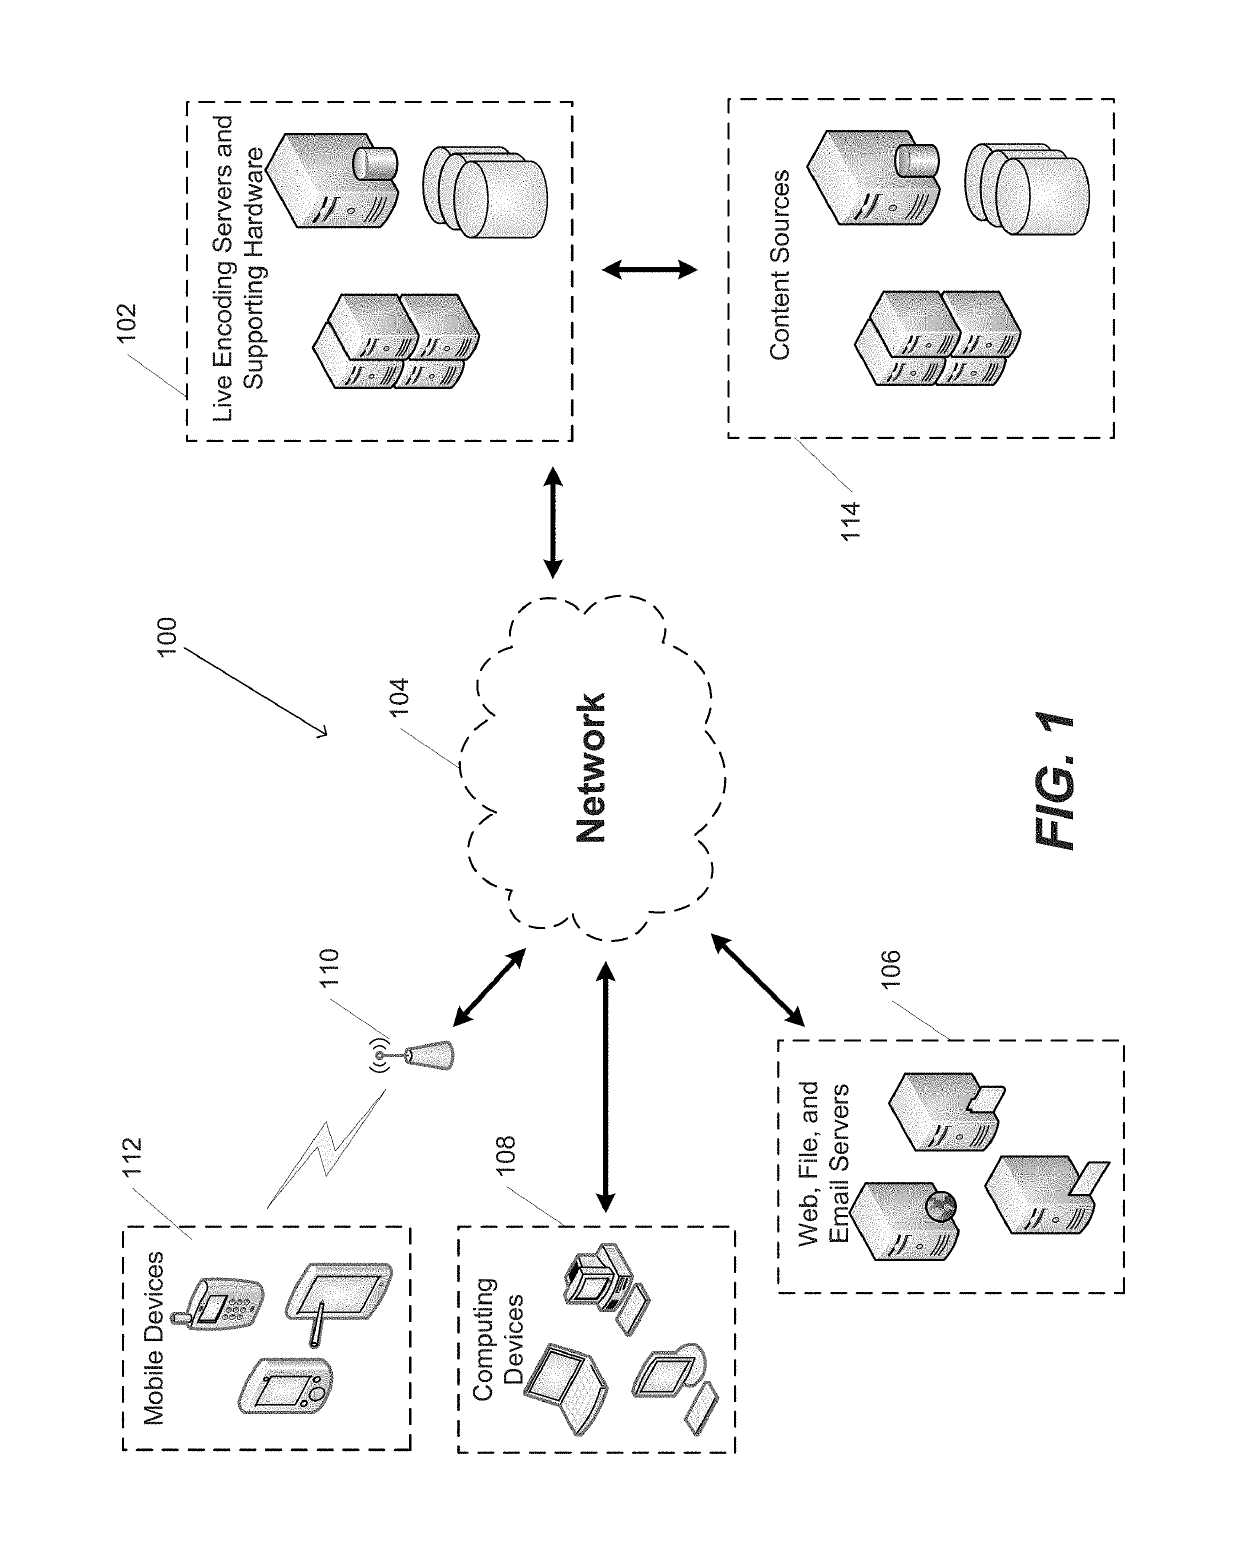 Systems and methods for frame duplication and frame extension in live video encoding and streaming